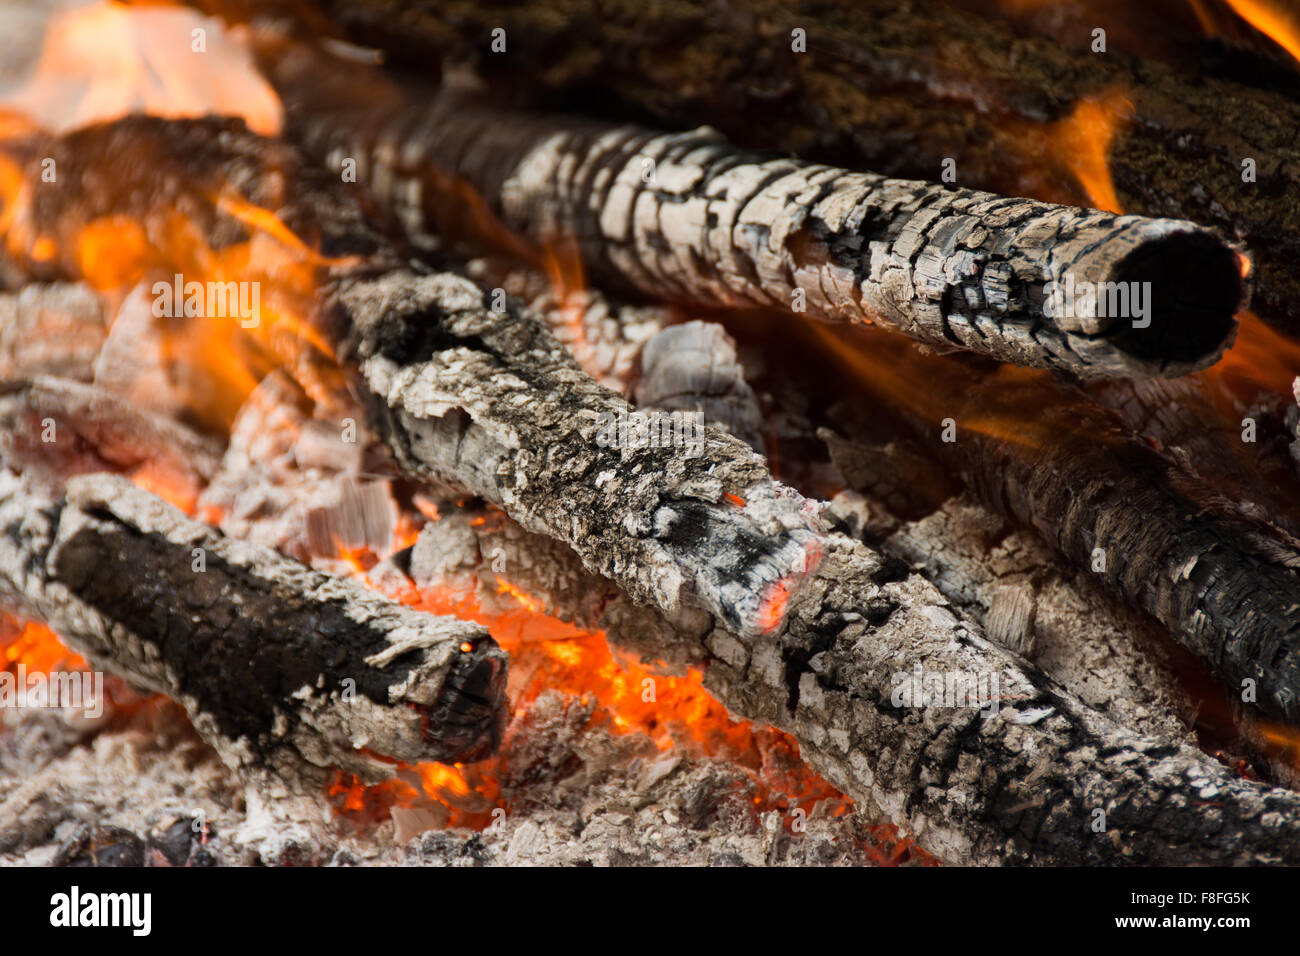 Burning wood in the fireplace, preparation of charcoal Stock Photo